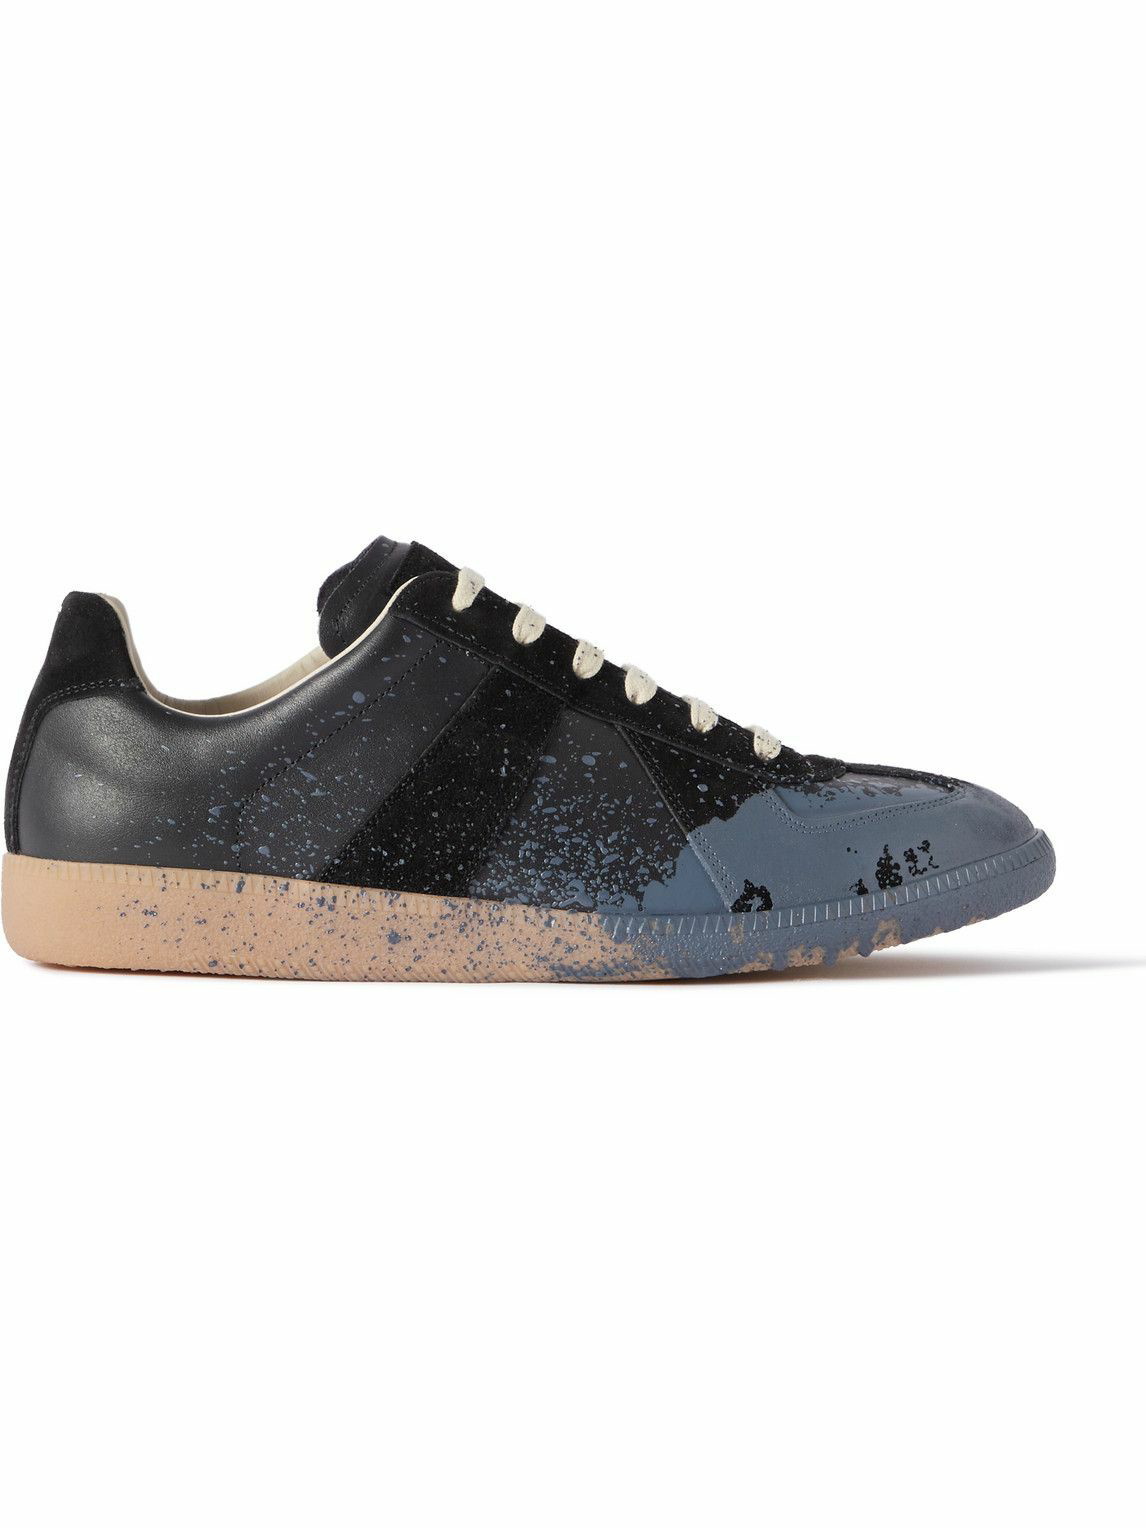 Maison Margiela - Replica Paint-Splattered Suede and Leather Sneakers ...